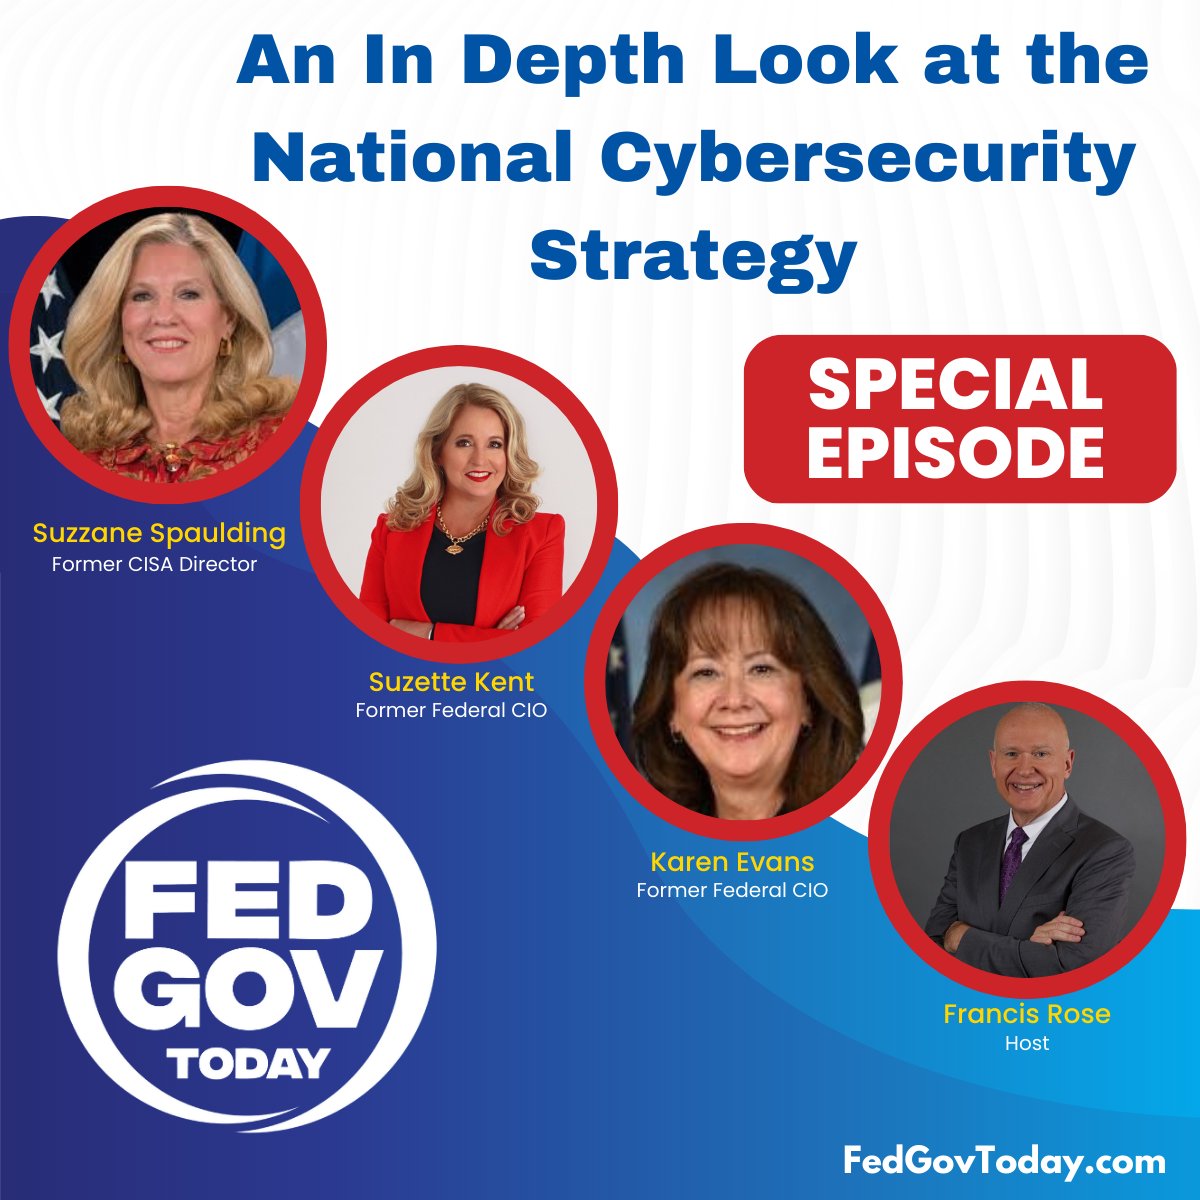 Listen to this special episode as Francis Rose talks to a panel of cyber experts and digs into the new #cybersecuritystrategy. Hear from @SpauldingSez  @SuzetteKKent  & Karen Evans

bit.ly/3ILO4gL